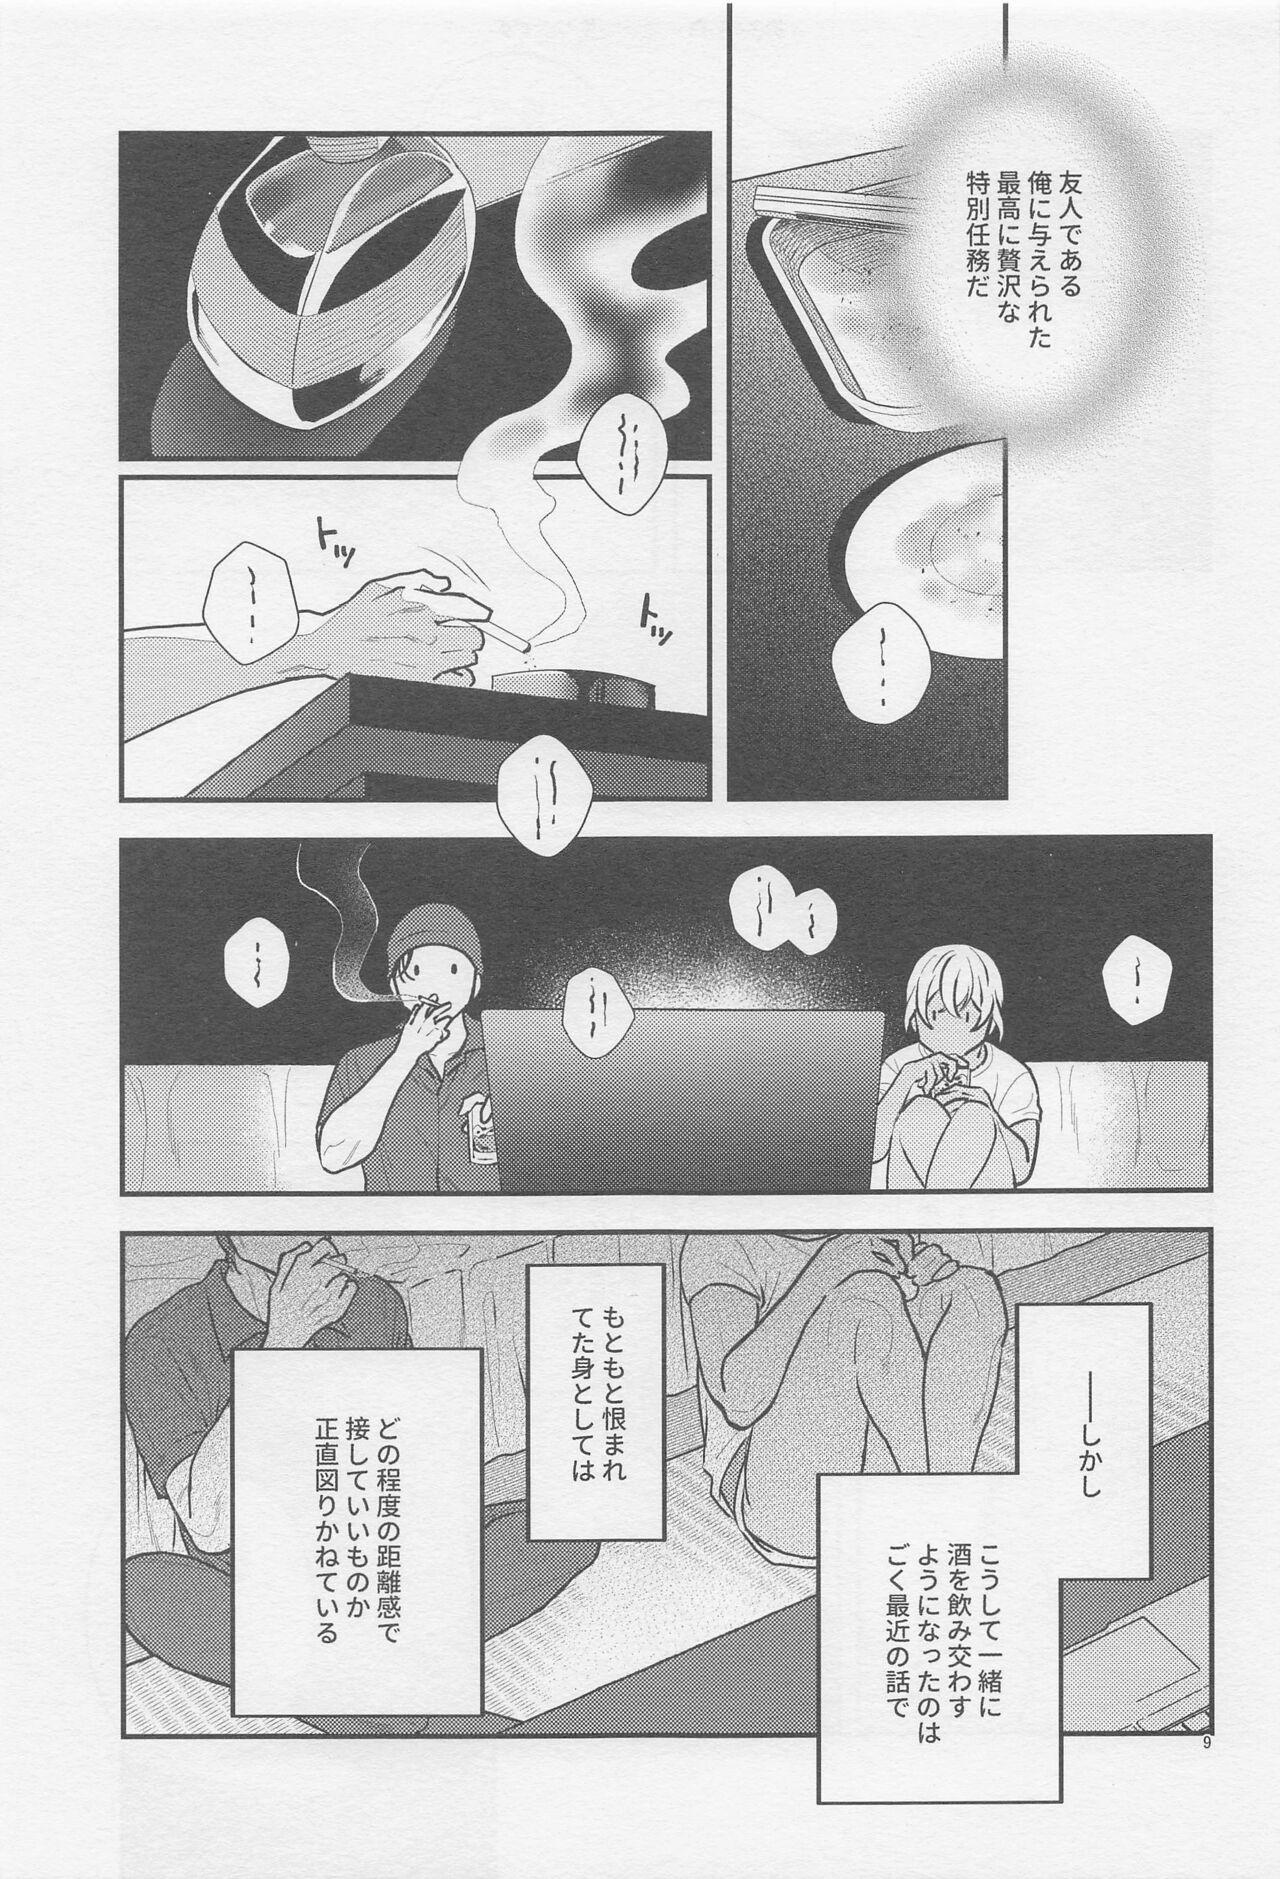 Spooning The first．．． - Detective conan | meitantei conan Fleshlight - Page 8